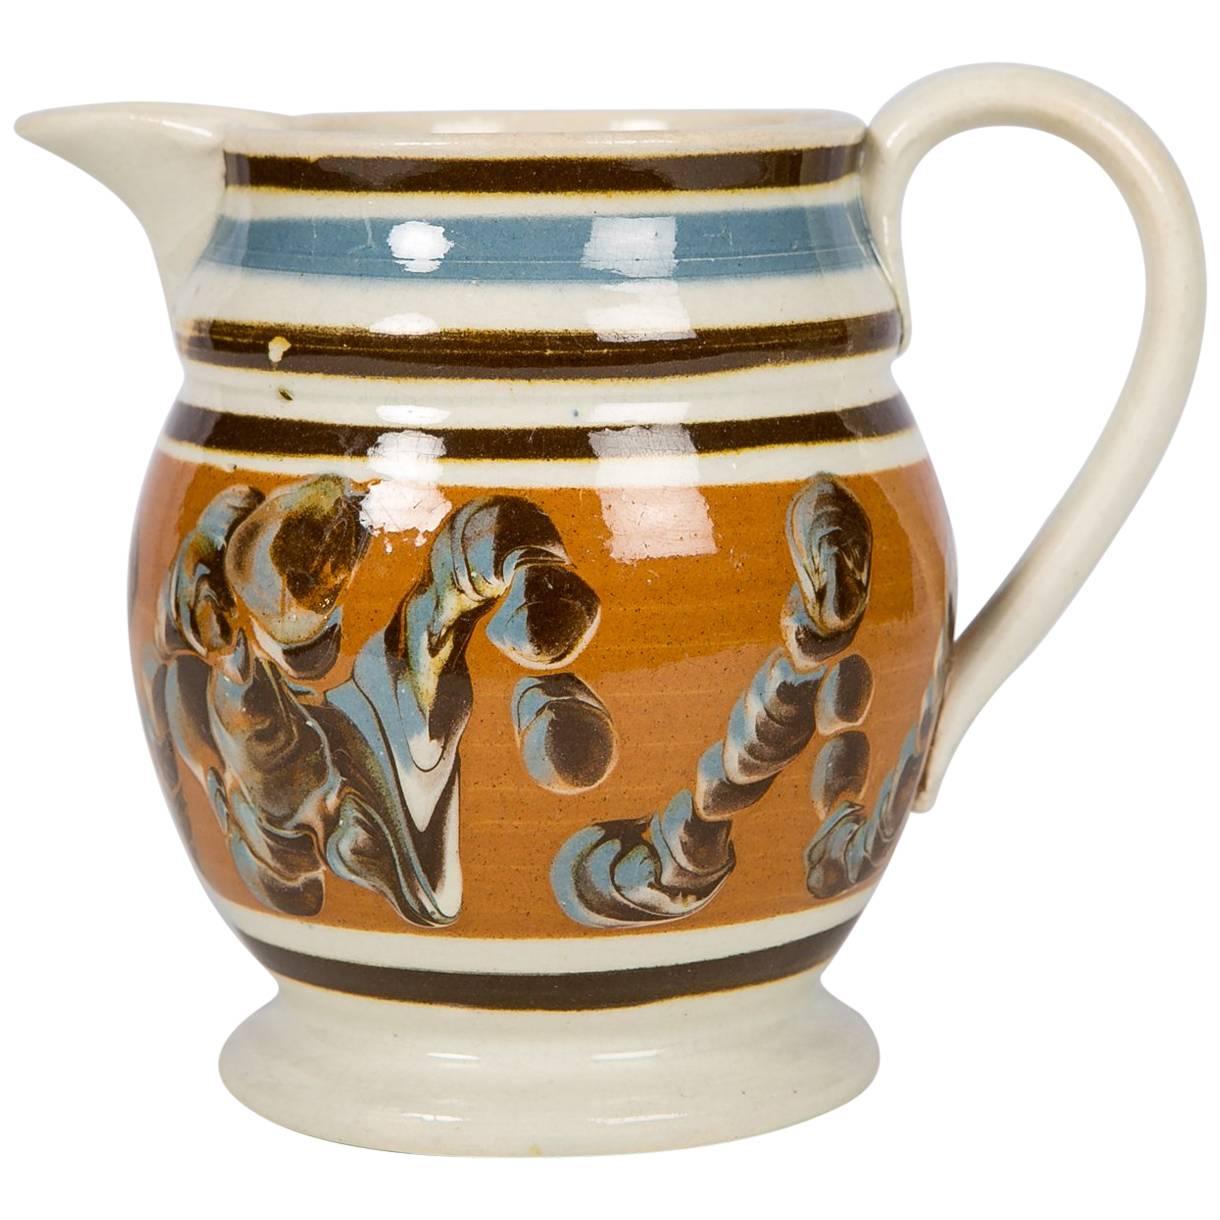 Mocha Ware Pitcher Decorated with a Cable Pattern